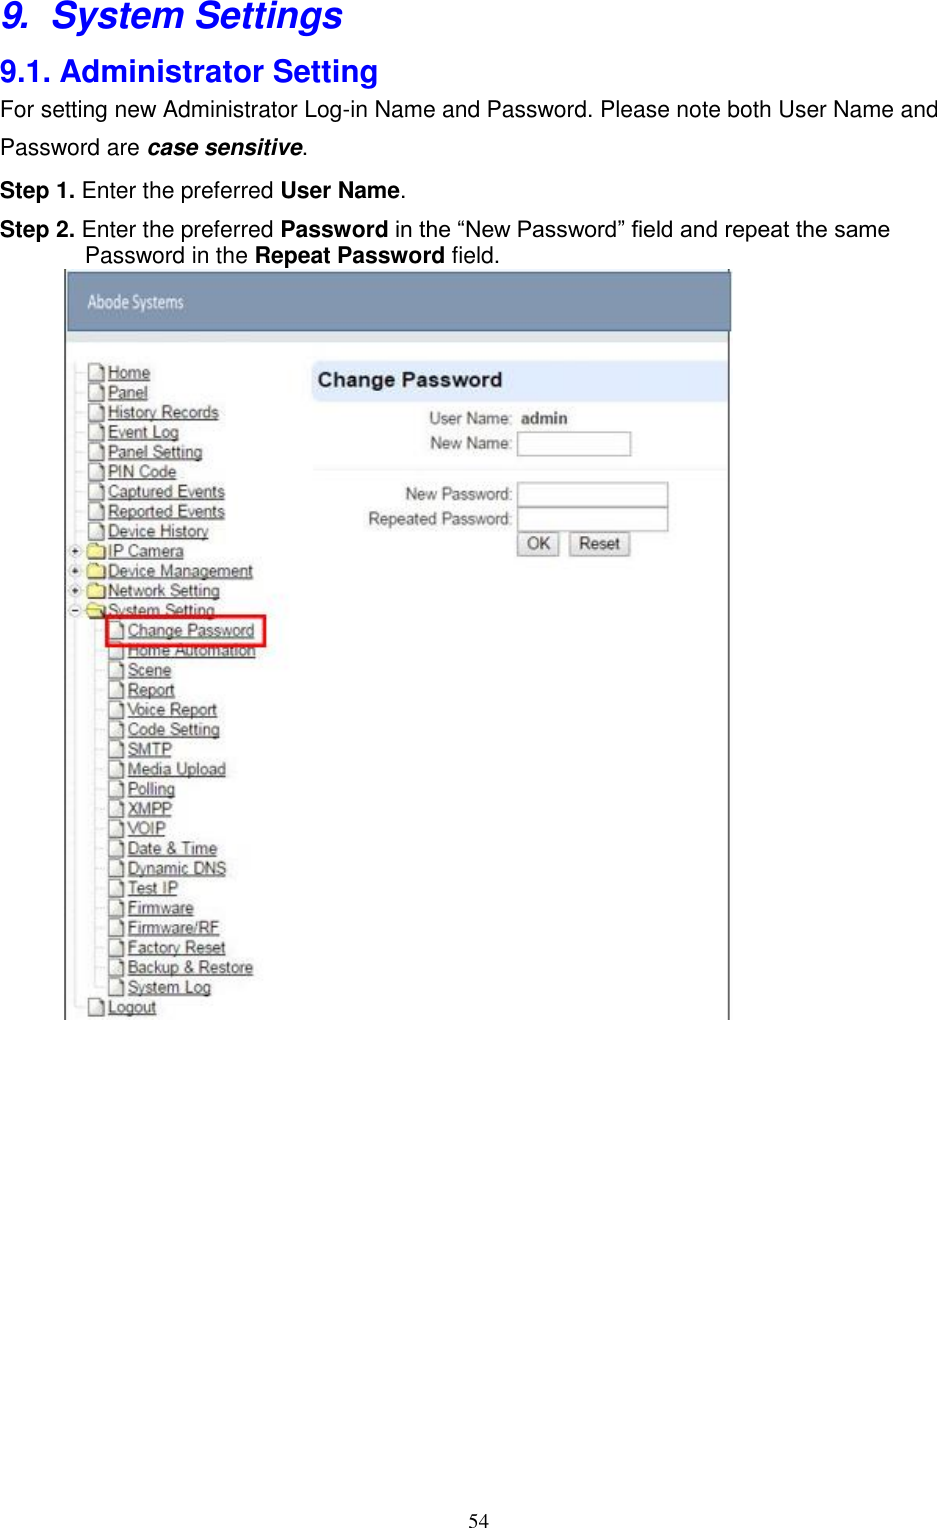 54  9. System Settings 9.1. Administrator Setting For setting new Administrator Log-in Name and Password. Please note both User Name and Password are case sensitive. Step 1. Enter the preferred User Name. Step 2. Enter the preferred Password in the “New Password” field and repeat the same Password in the Repeat Password field.                                             